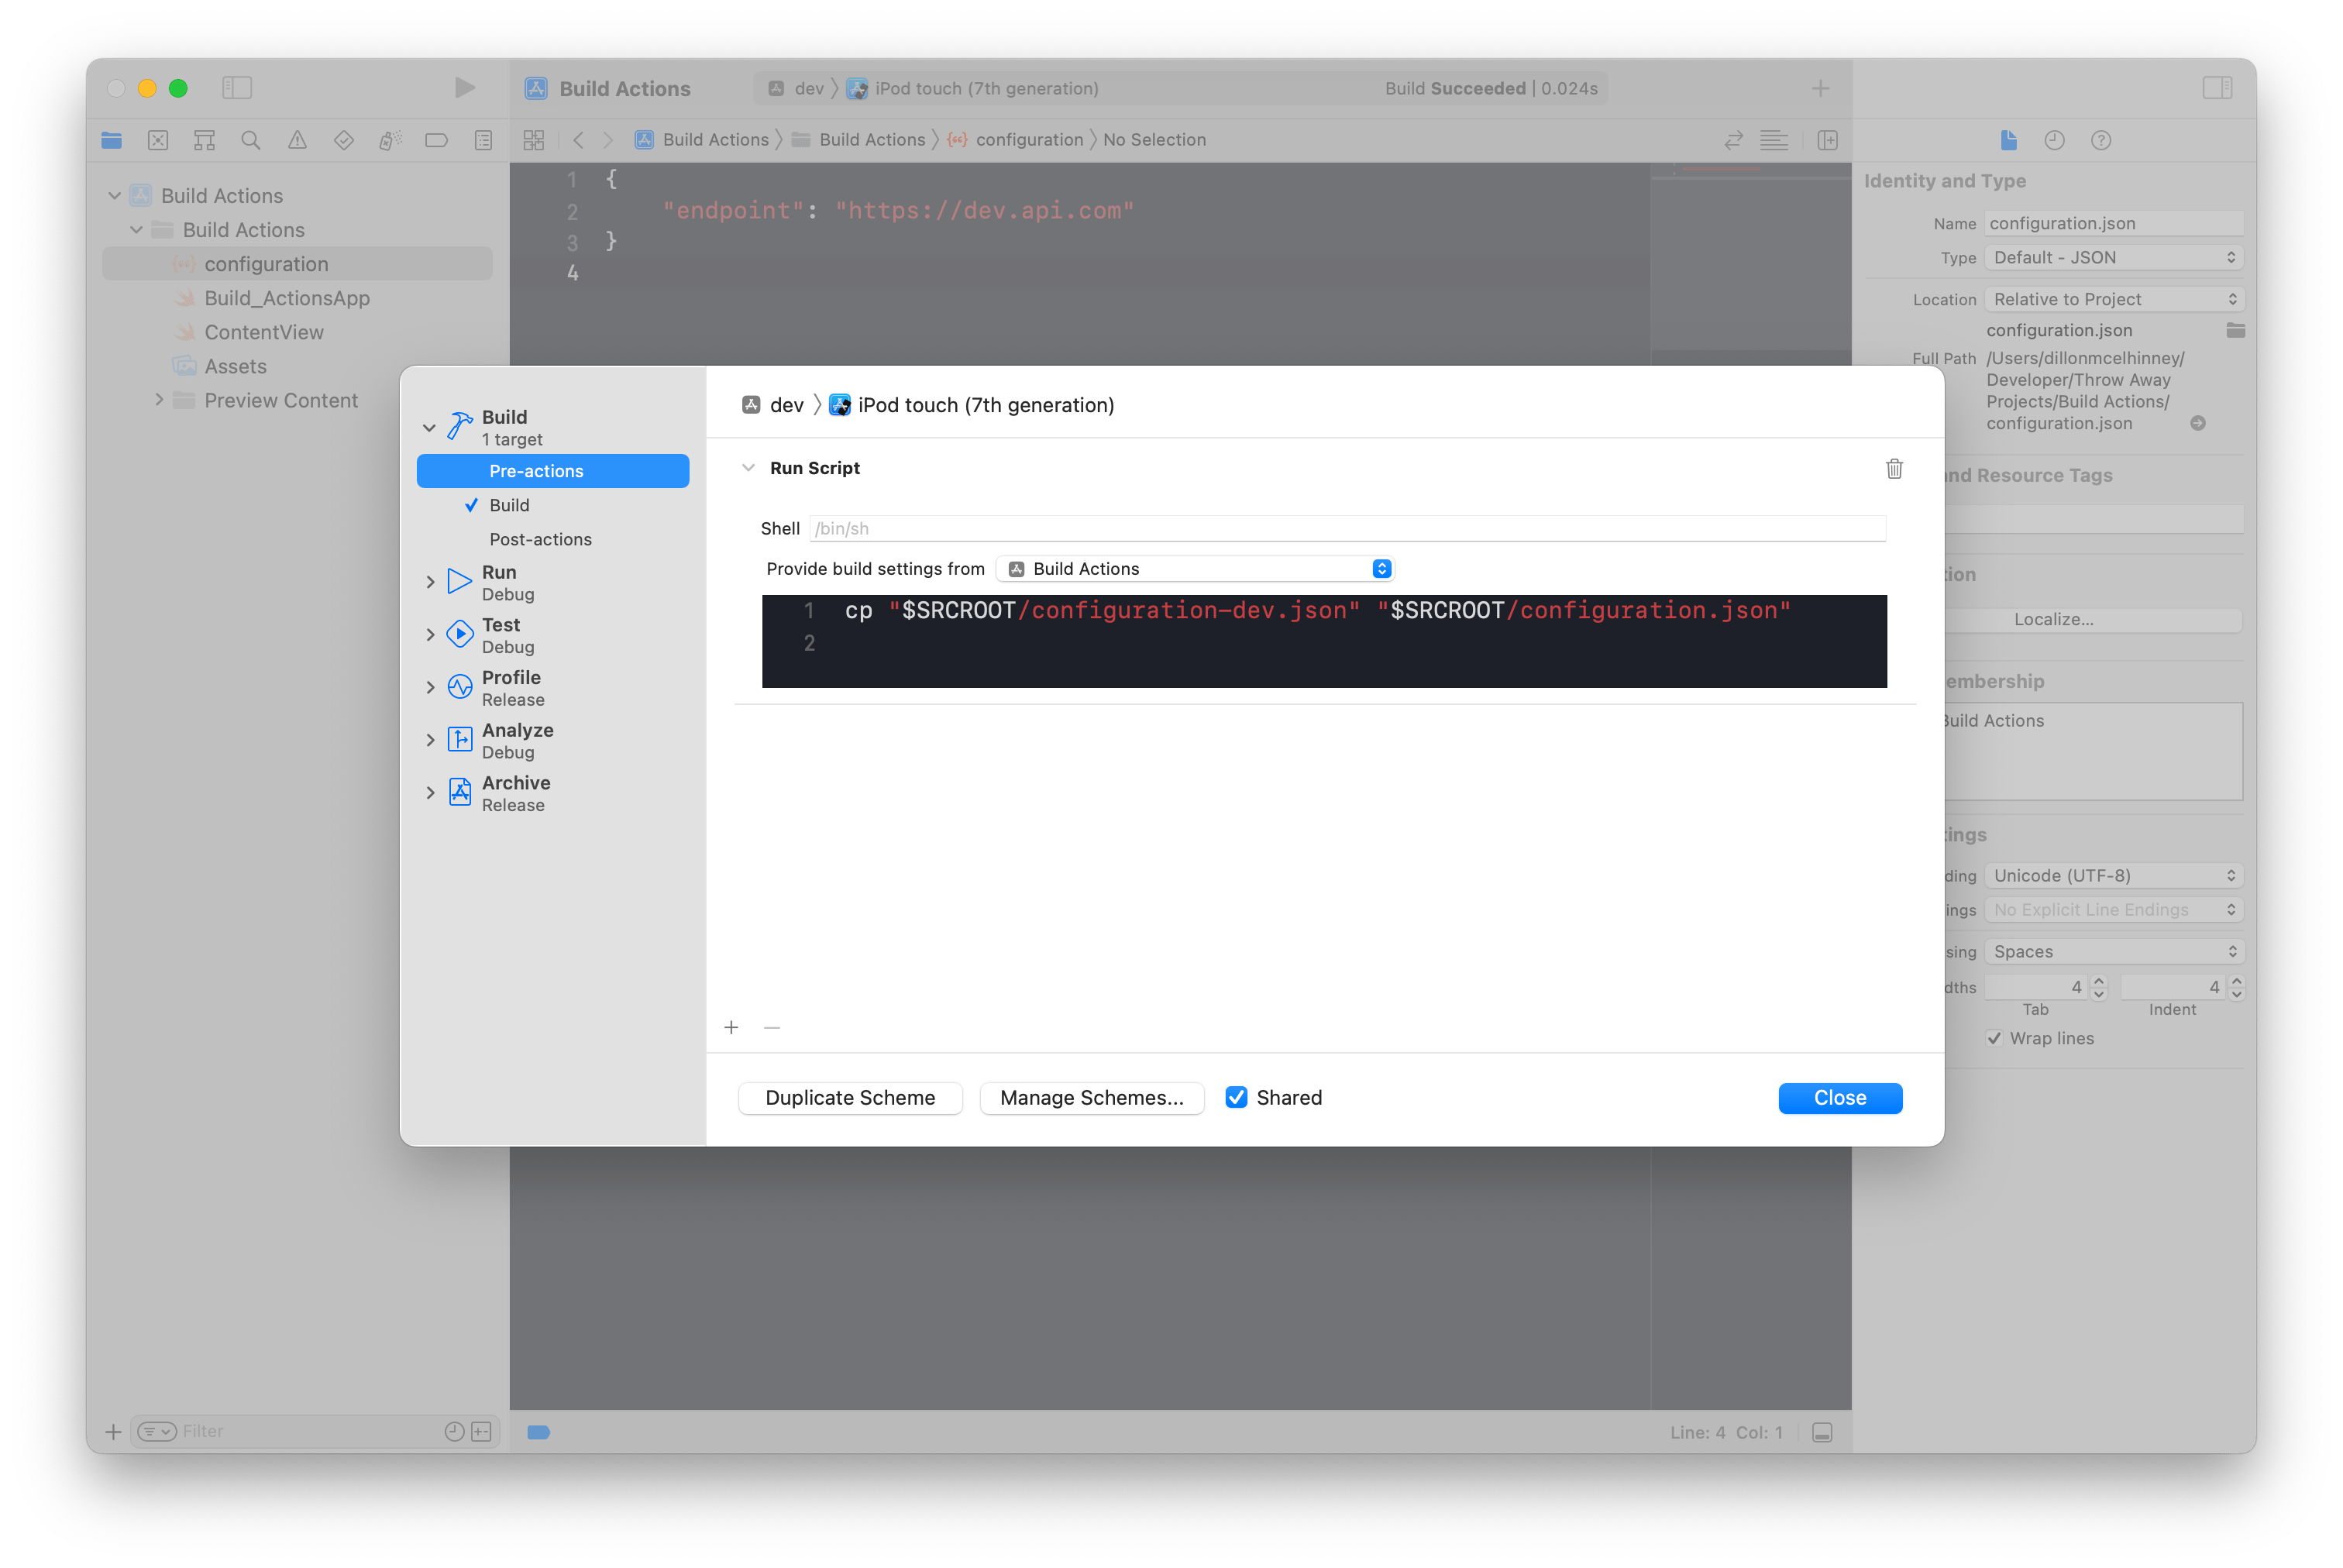 Screenshot of Xcode scheme editor showing the final action for the dev configuration.